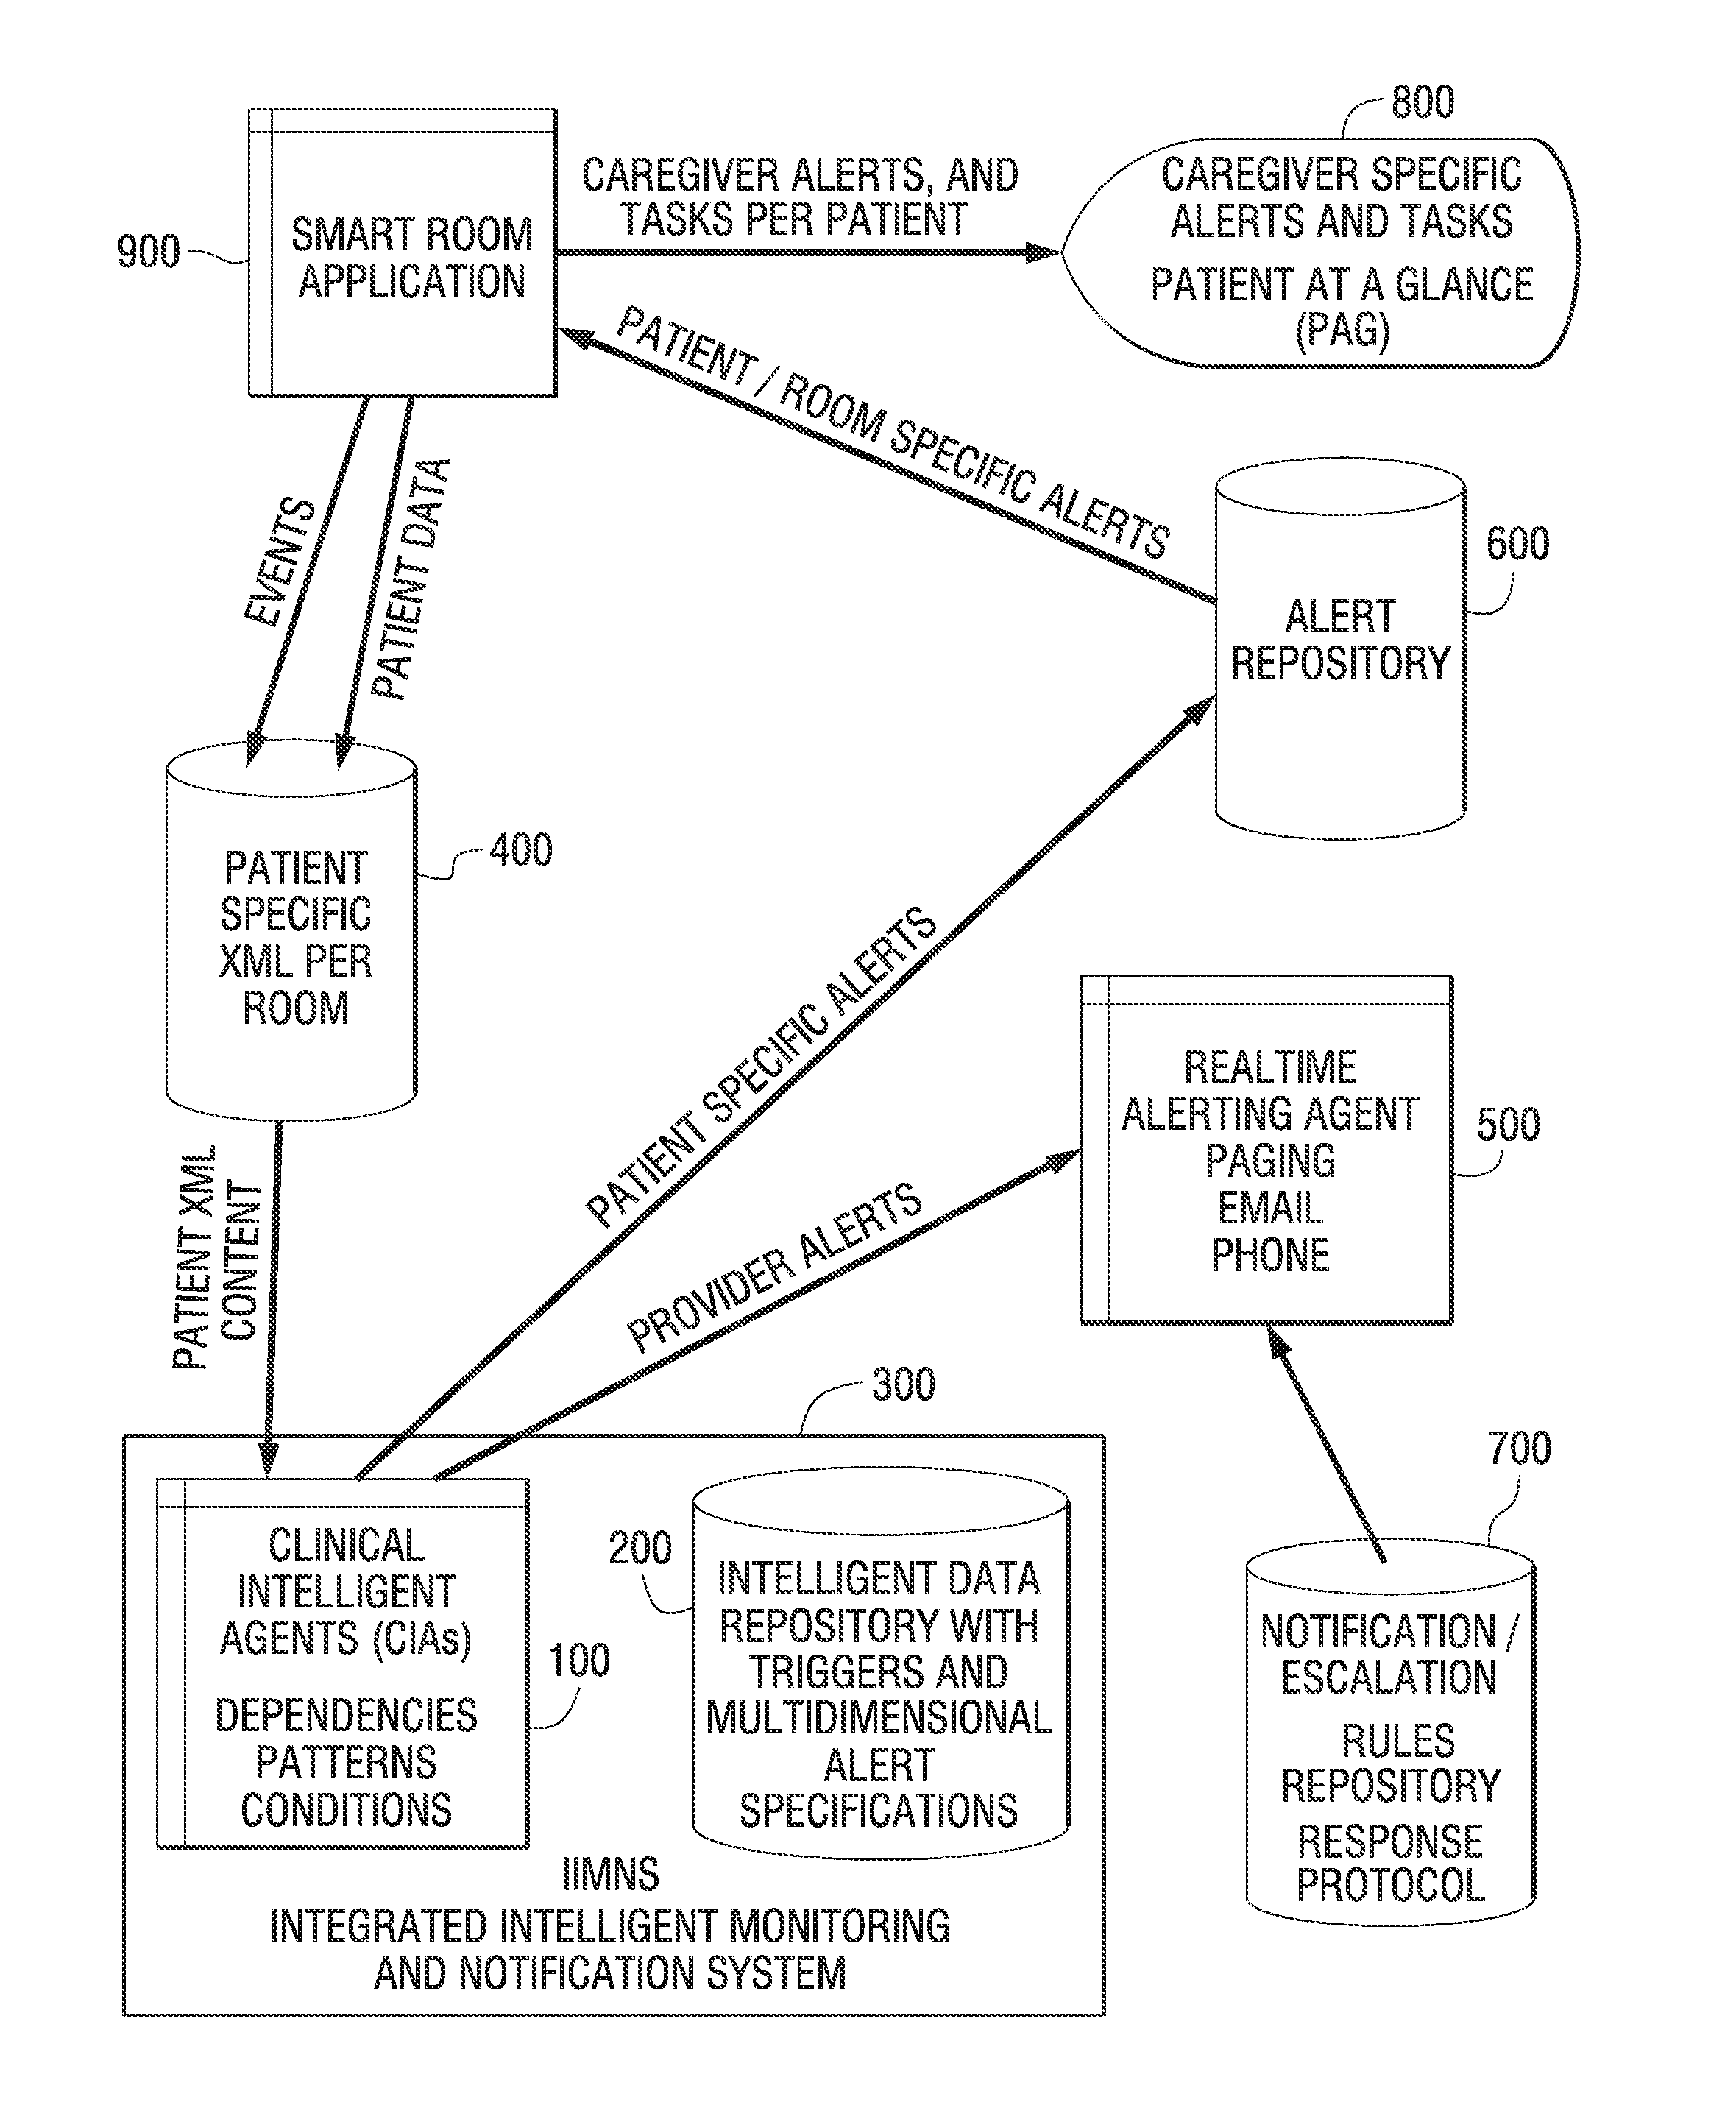 System and Method for Clinical Intelligent Agents Implementing an Integrated Intelligent Monitoring and Notification System